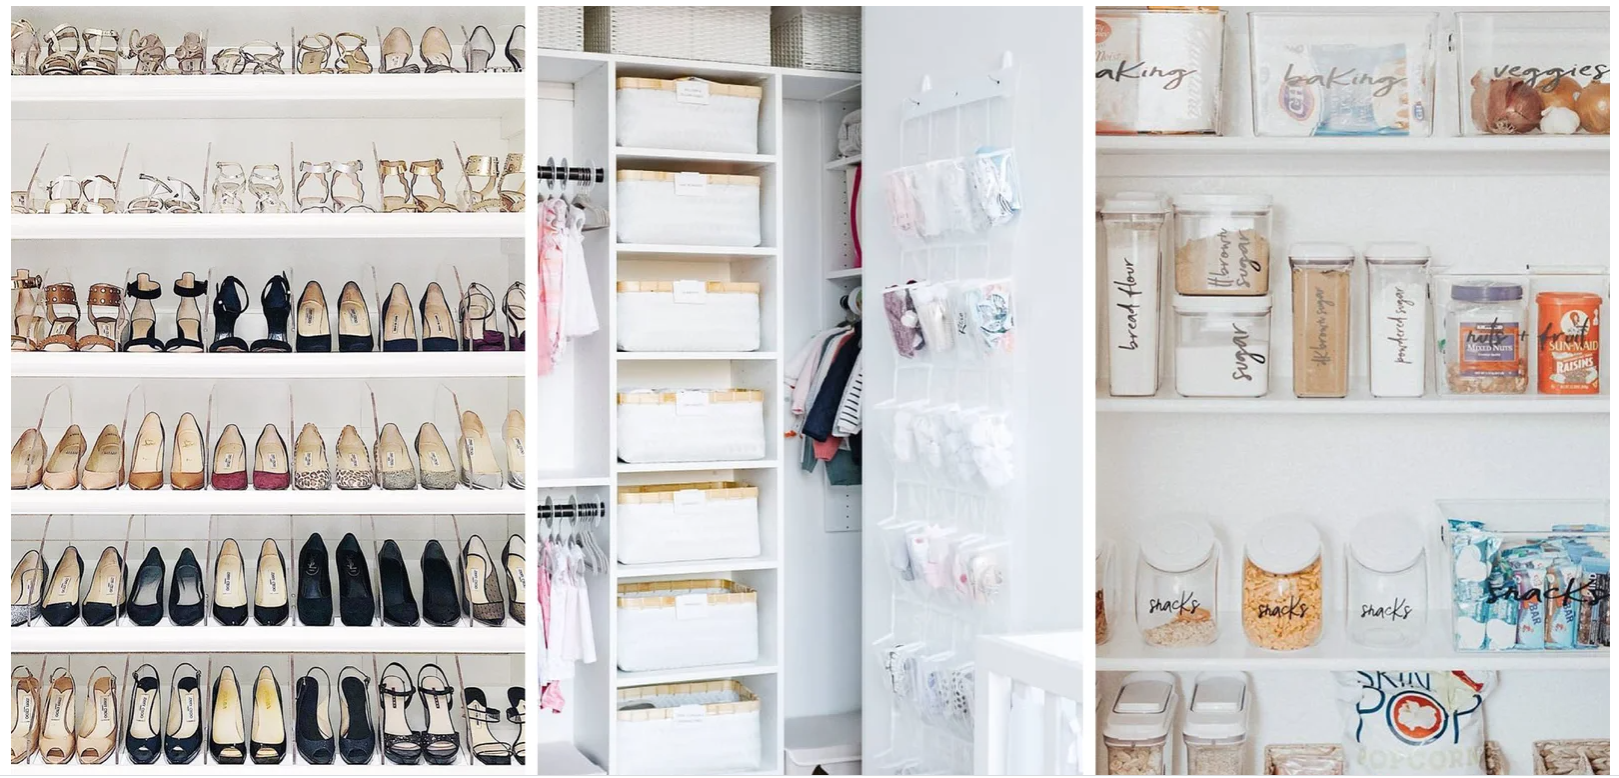 Atlanta Professional Organizer Shares 6 Steps to Spring Cleaning